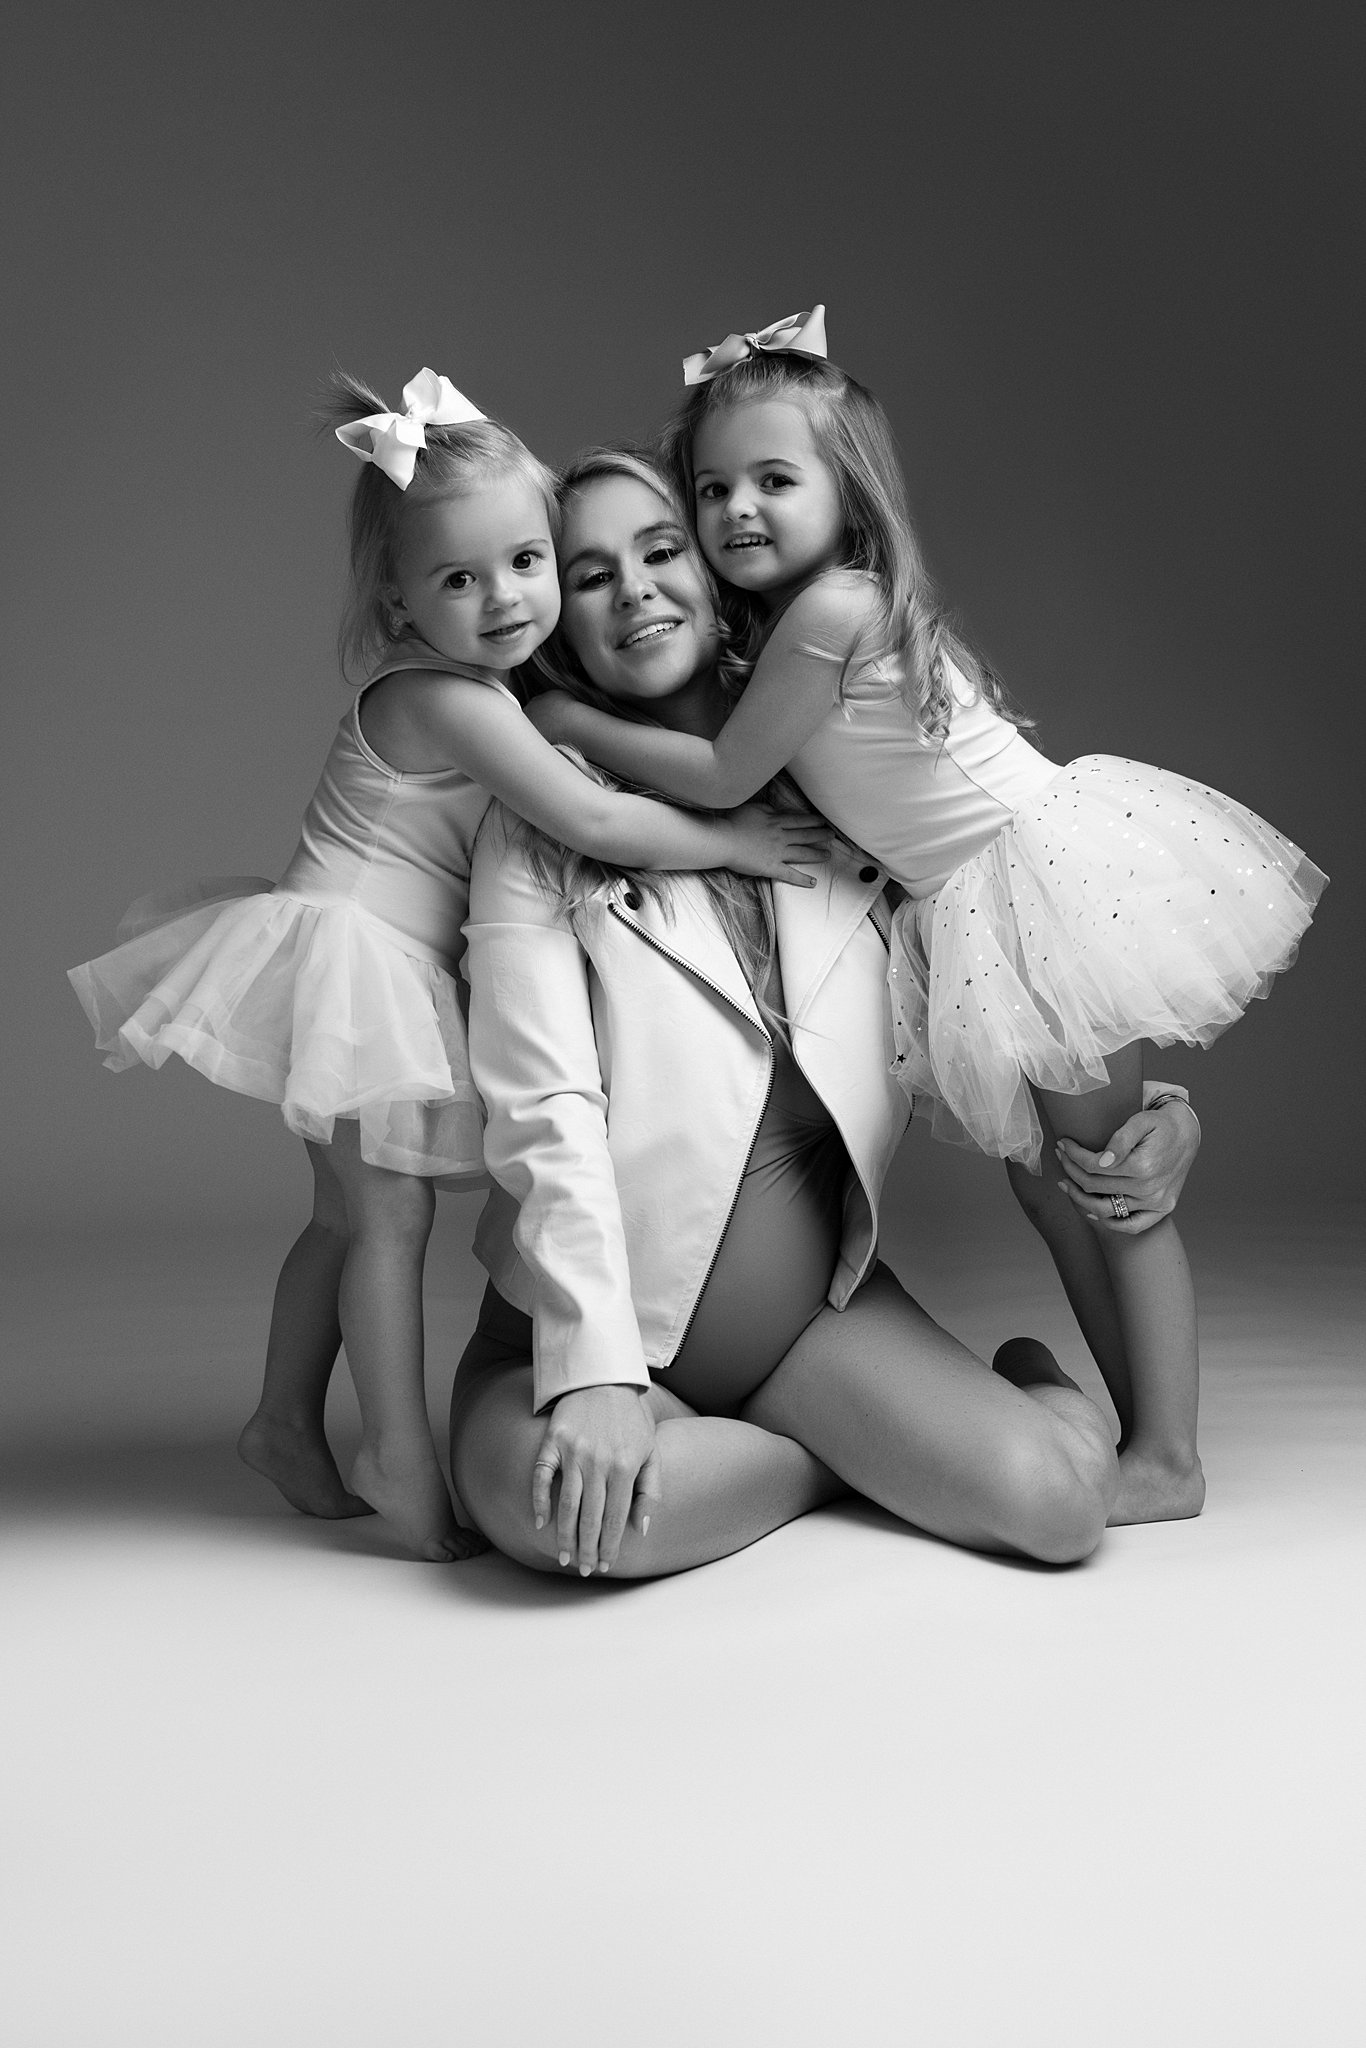 A pregnant mother sits on the floor of a studio while her two daughters hug her while wearing tutus Gootoosh